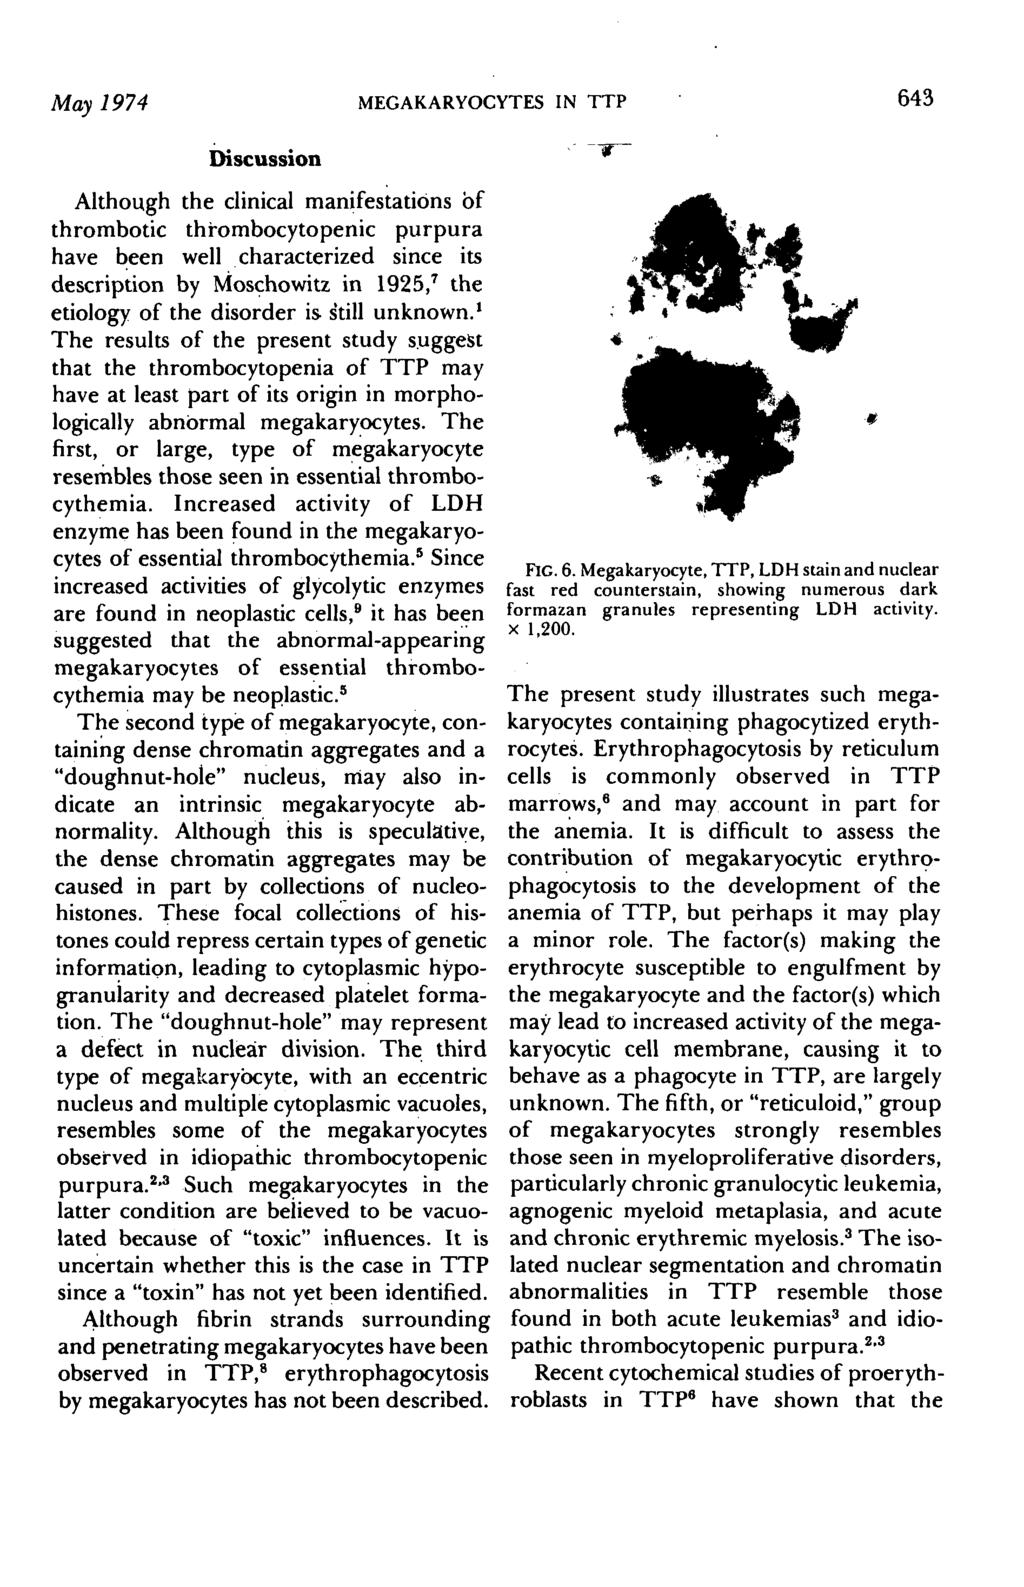 May 1974 MEGAKARYOCYTES IN TTP 643 Discussion Although the clinical manifestations of thrombotic thrombocytopenic purpura have been well characterized since its description by Moschowitz in 1925, 7